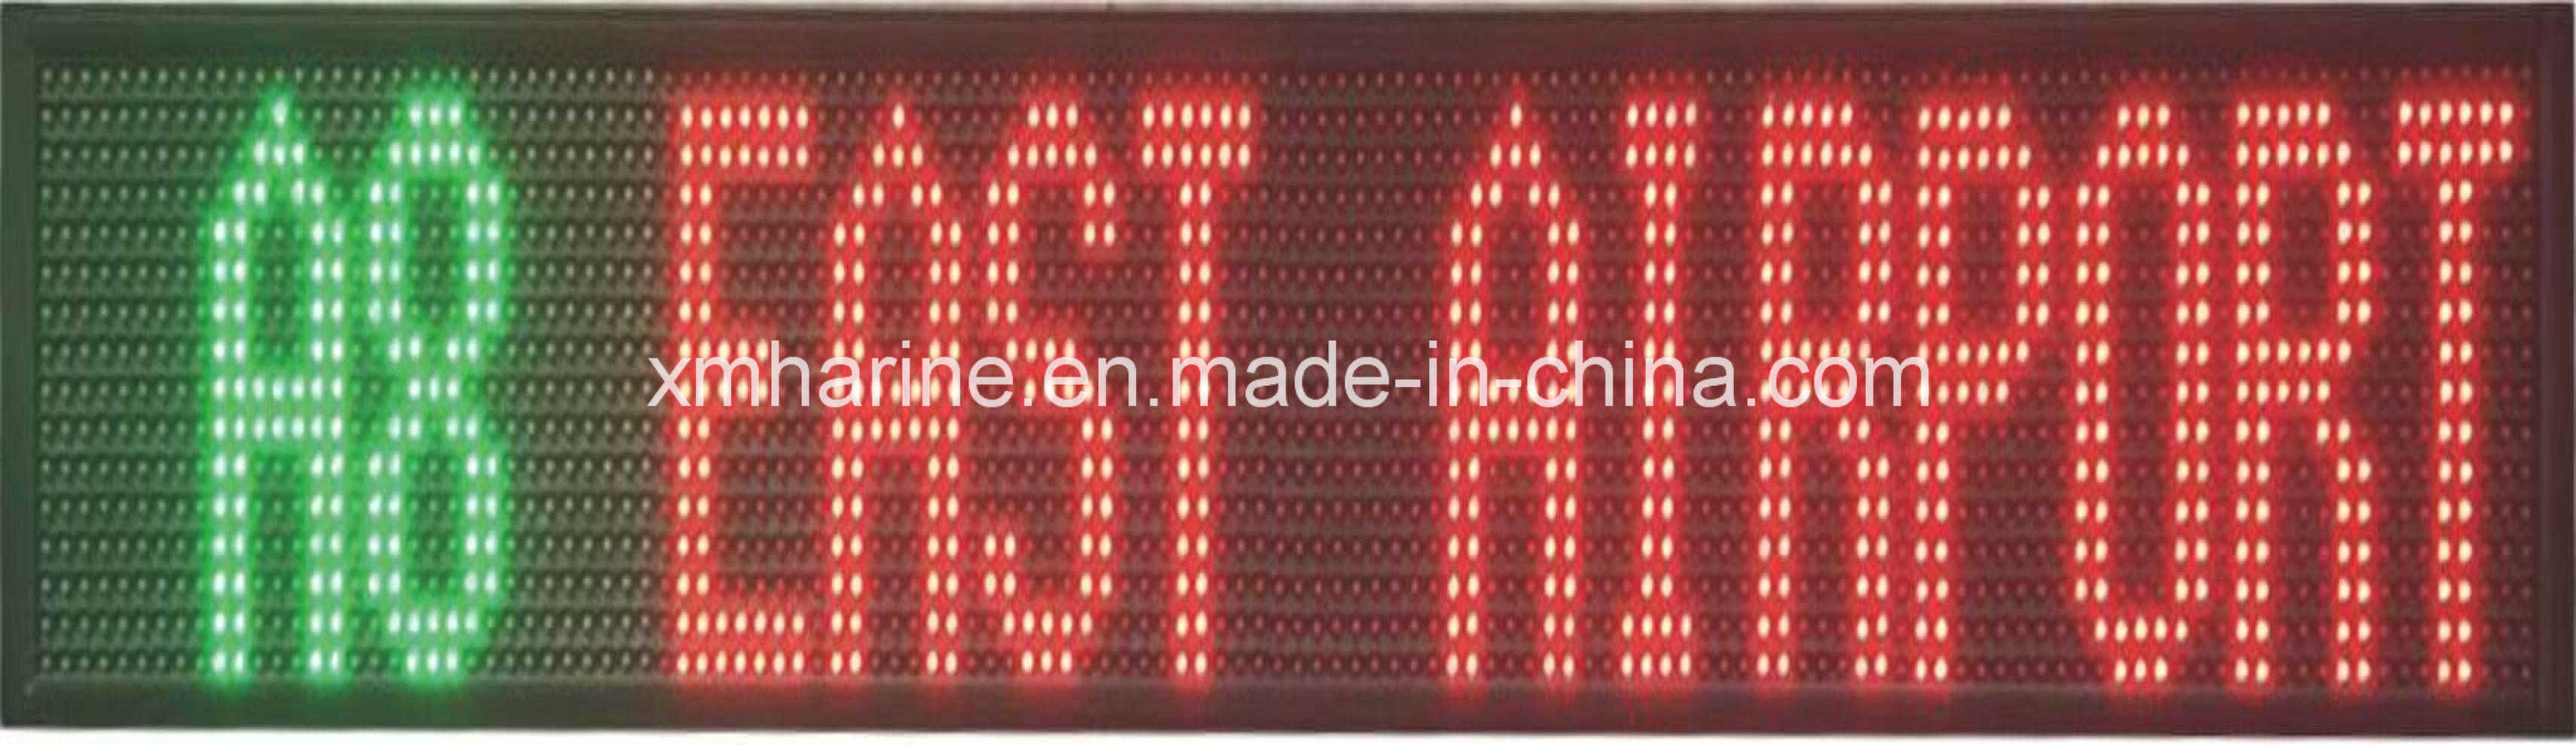 Bus Multicolour LED Moving Sign Display